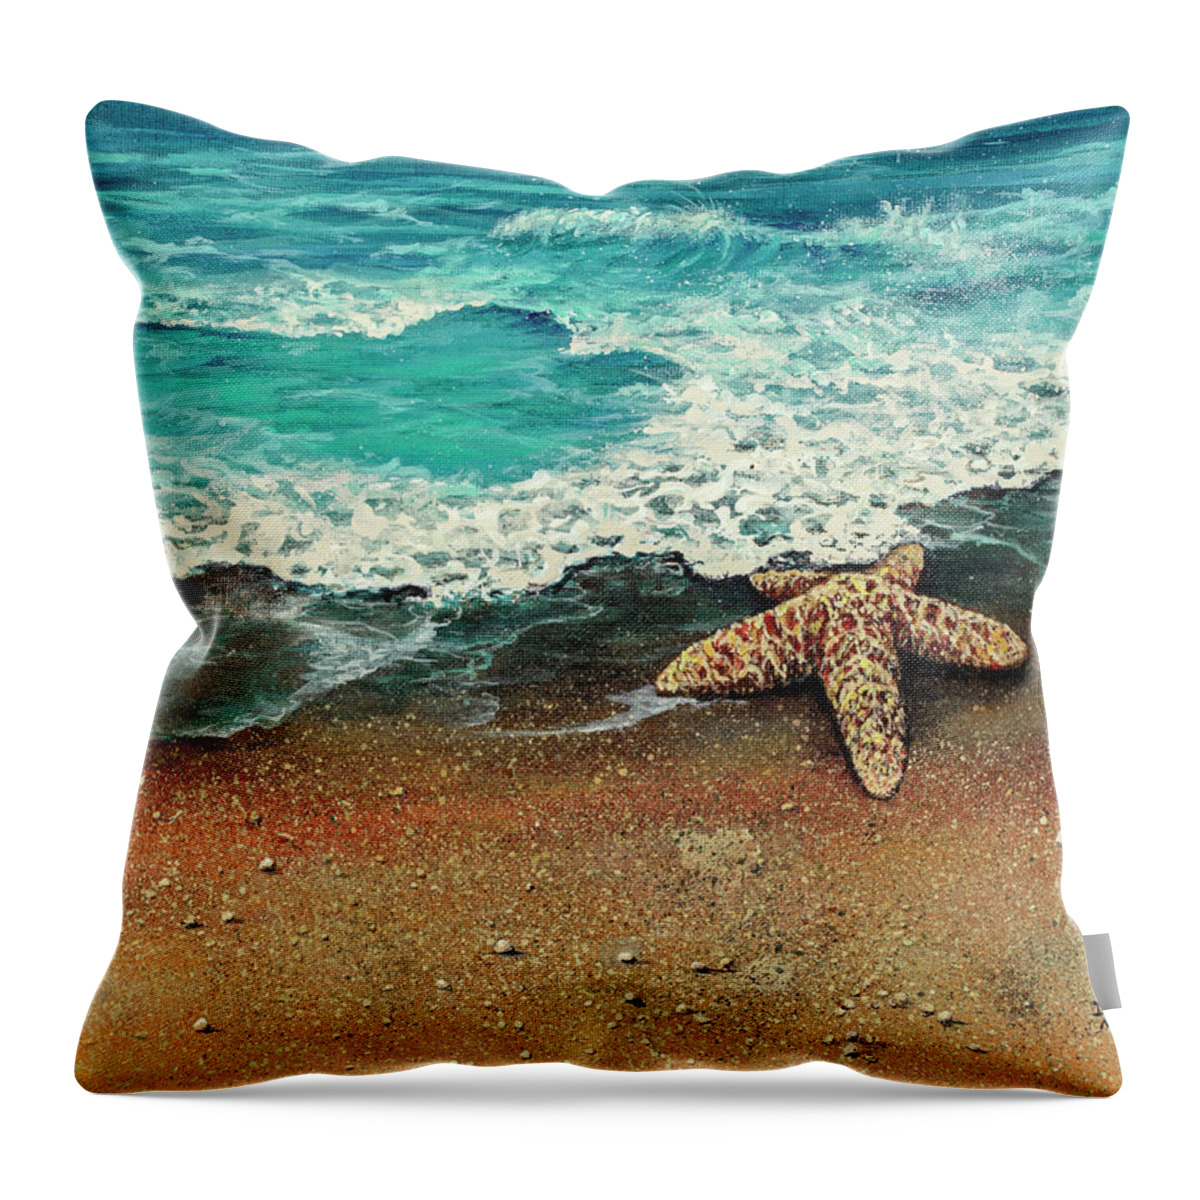 Seascape Throw Pillow featuring the painting Washed Ashore by Darice Machel McGuire